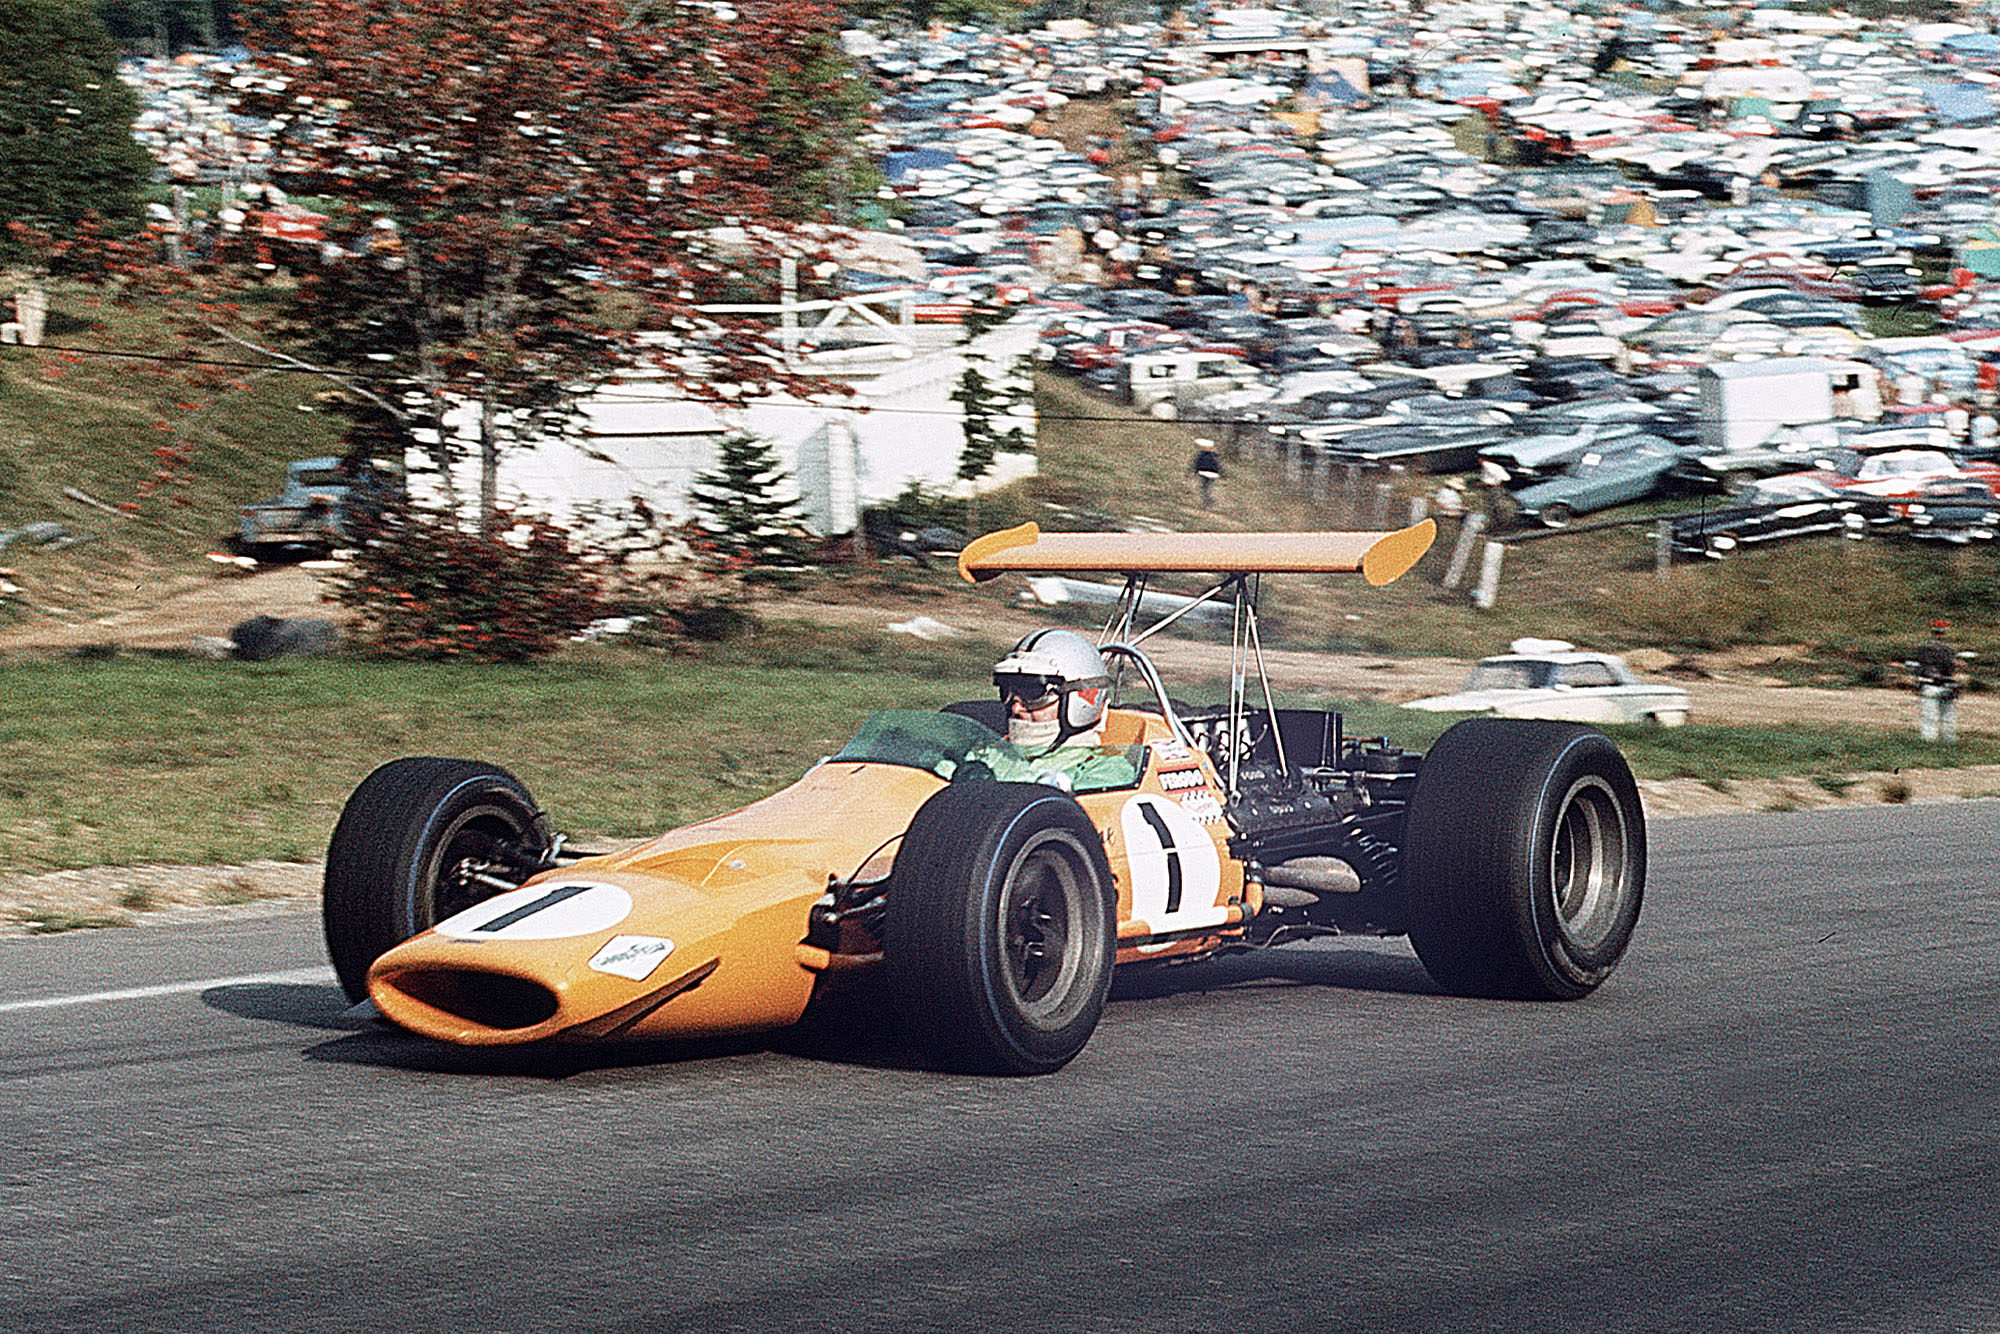 Denny Hulme secured victory at the Canadian GP in the McLaren-Ford on 22 September 1968.